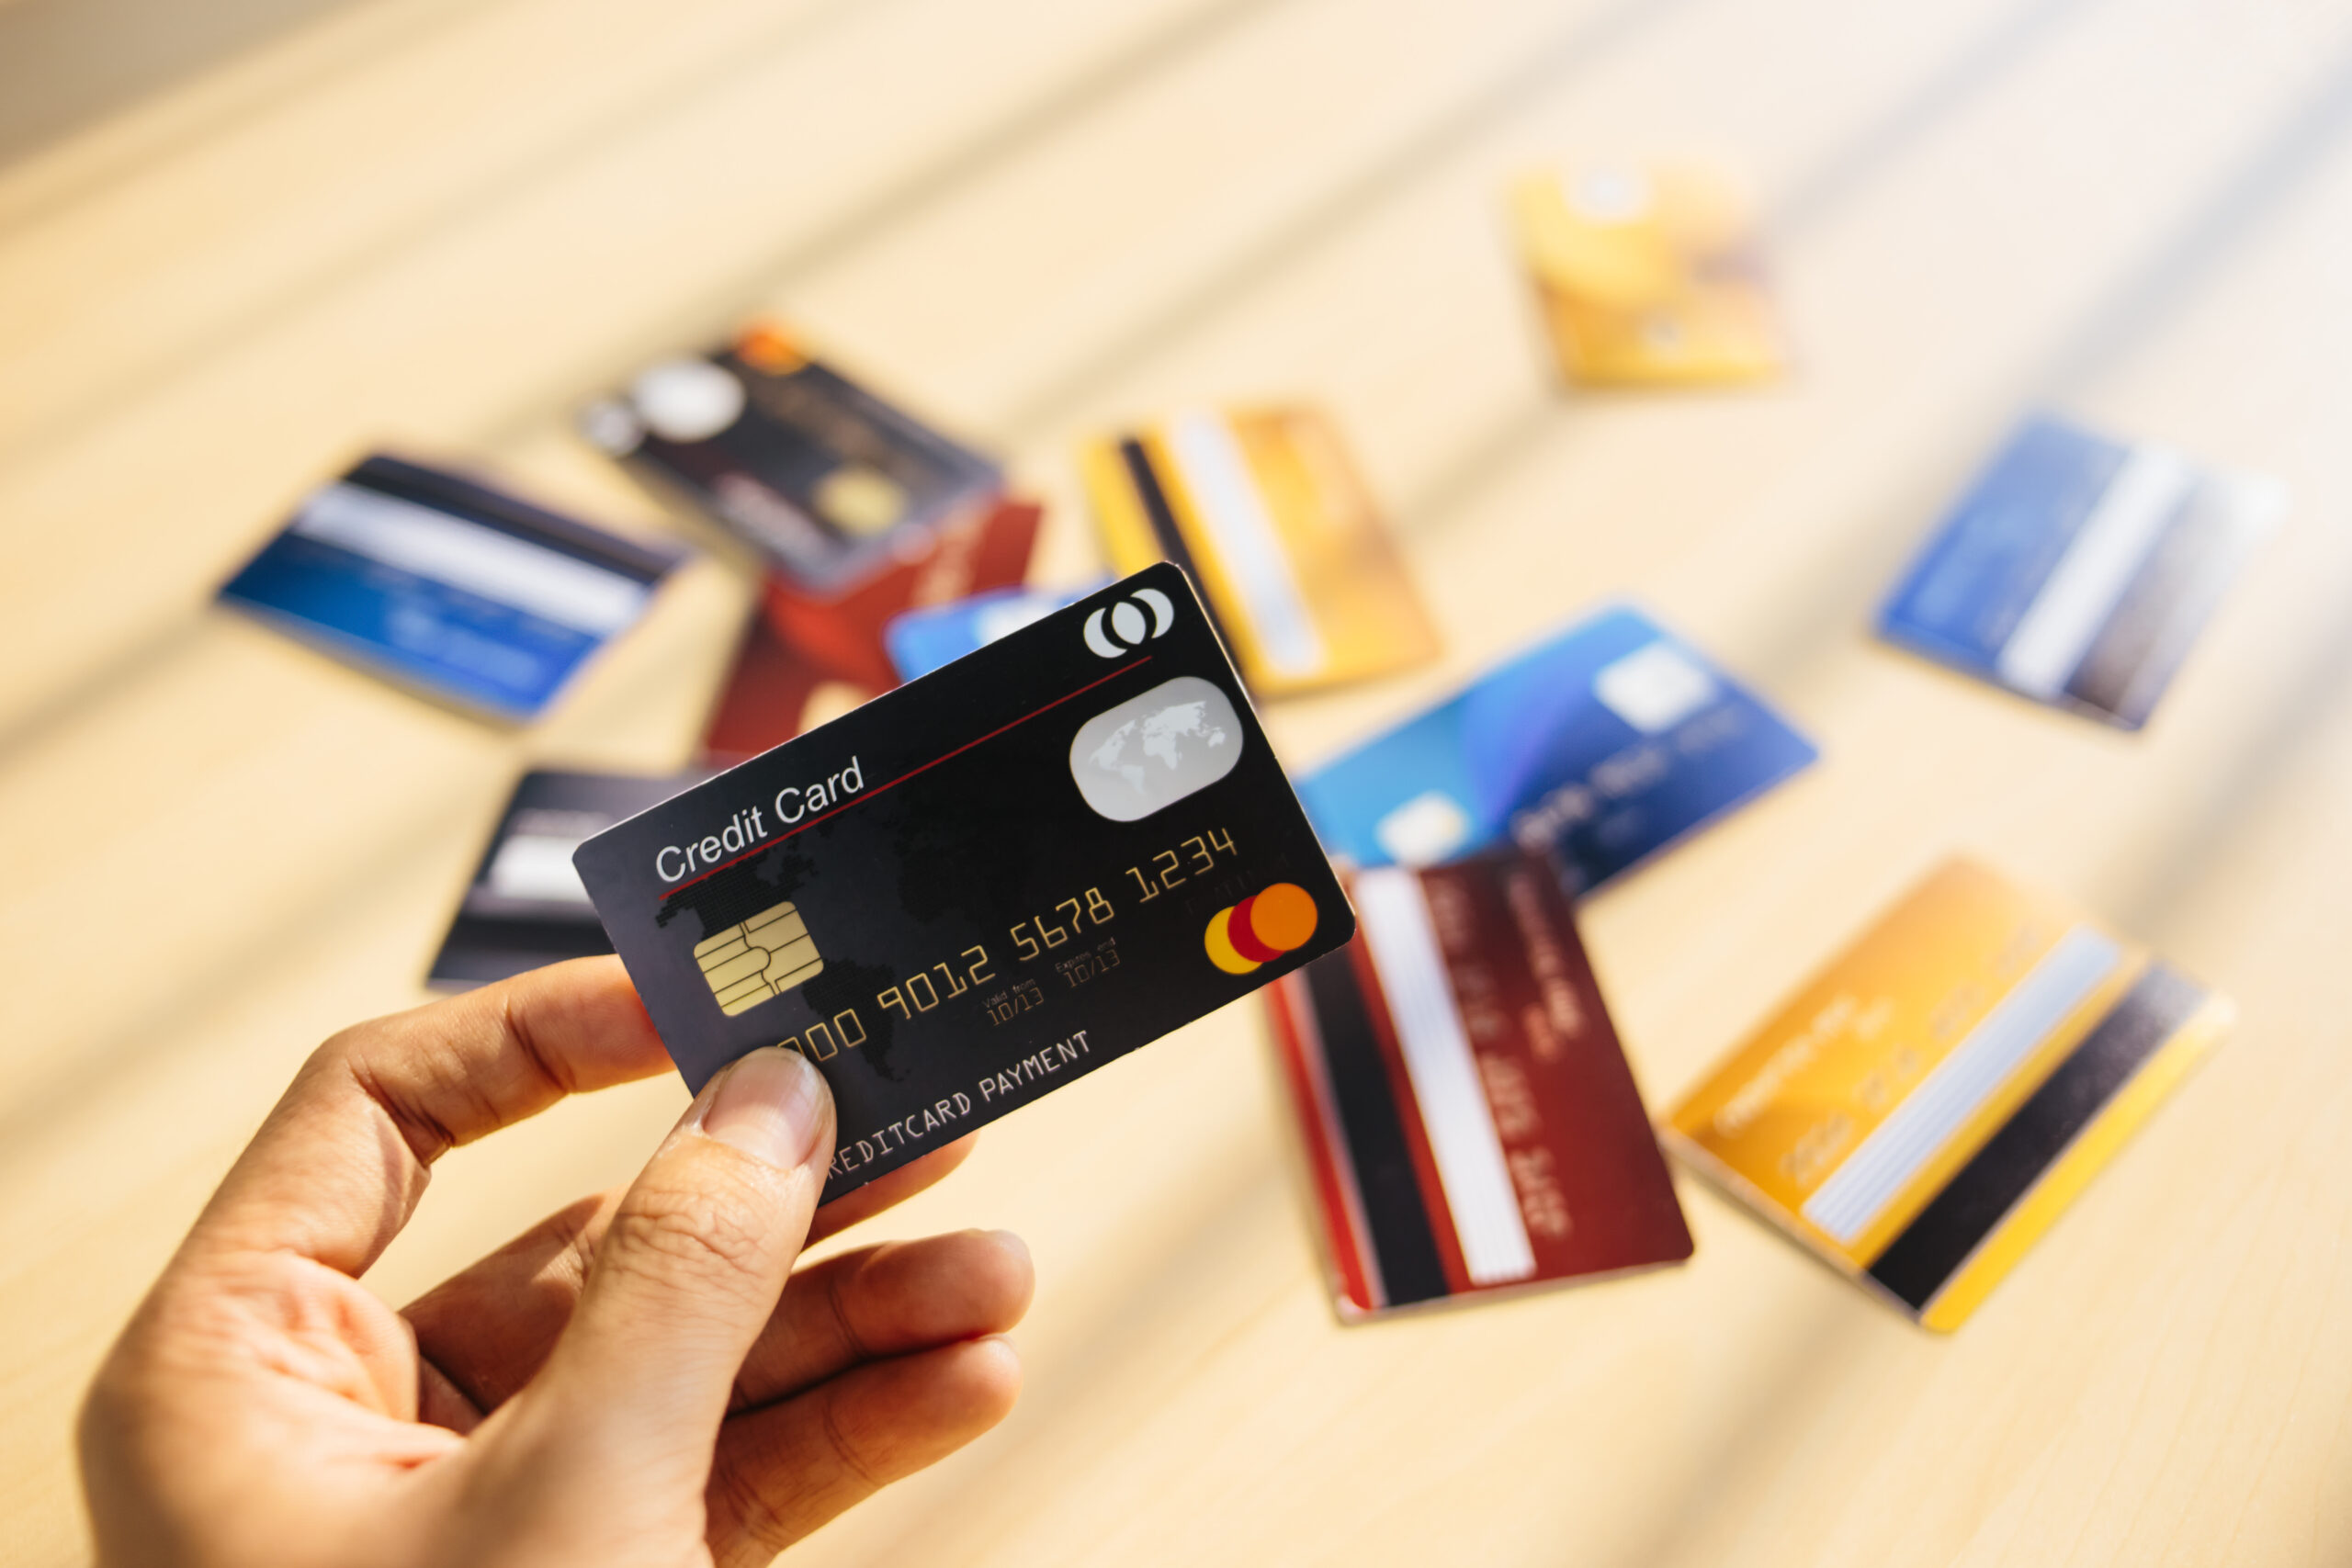 person holding a credit card in the foreground, with a pile of credit cards laying on a table in the blurred background